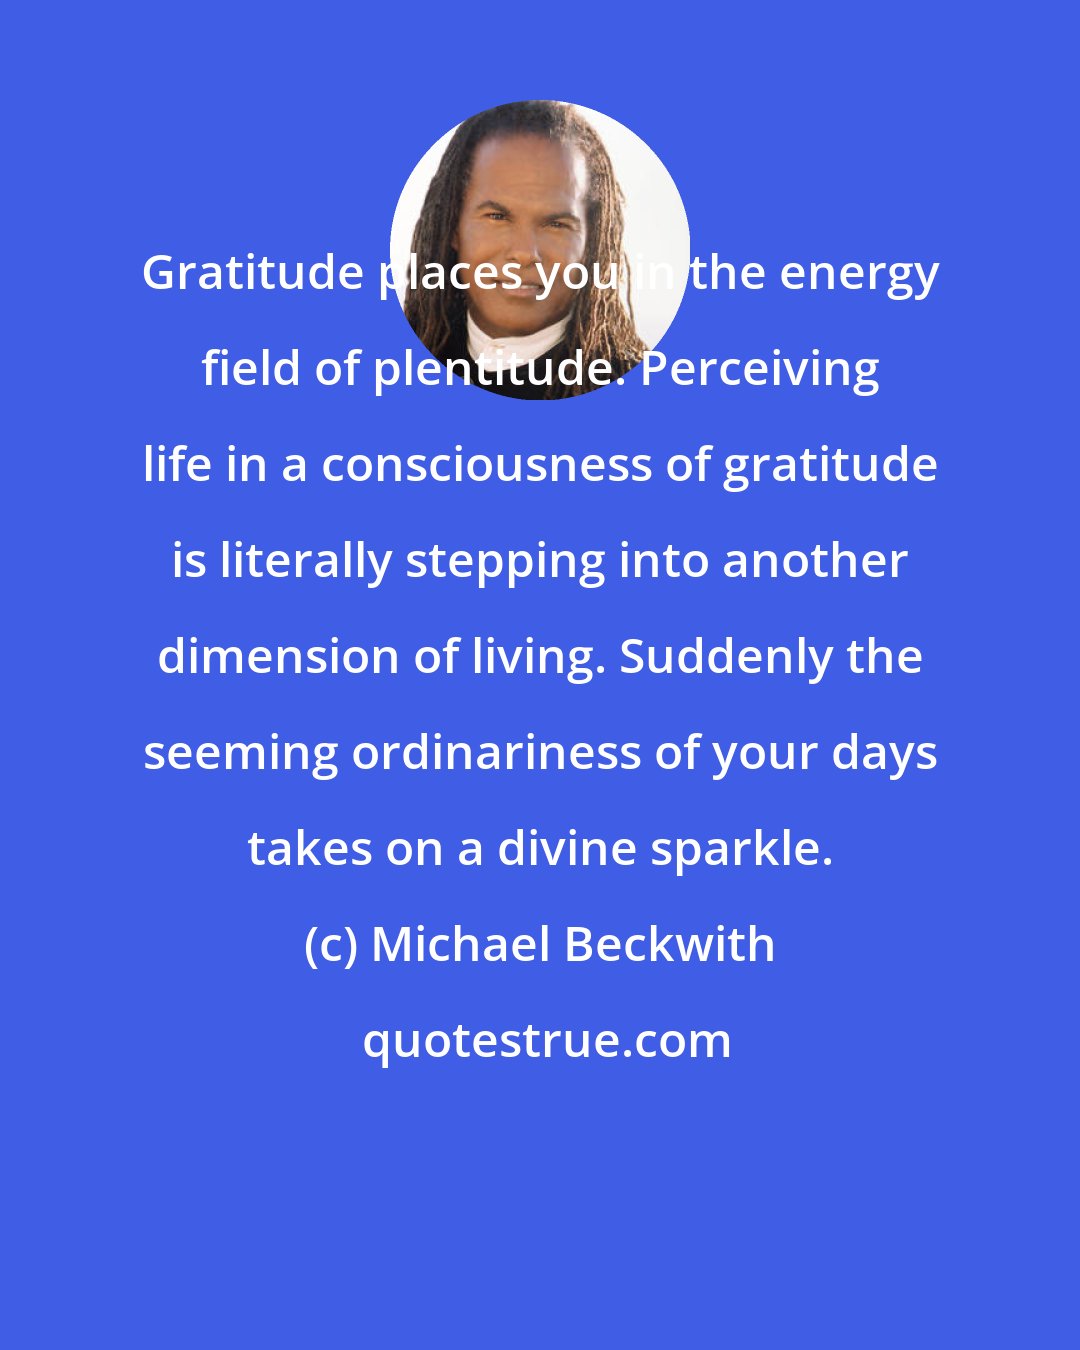 Michael Beckwith: Gratitude places you in the energy field of plentitude. Perceiving life in a consciousness of gratitude is literally stepping into another dimension of living. Suddenly the seeming ordinariness of your days takes on a divine sparkle.